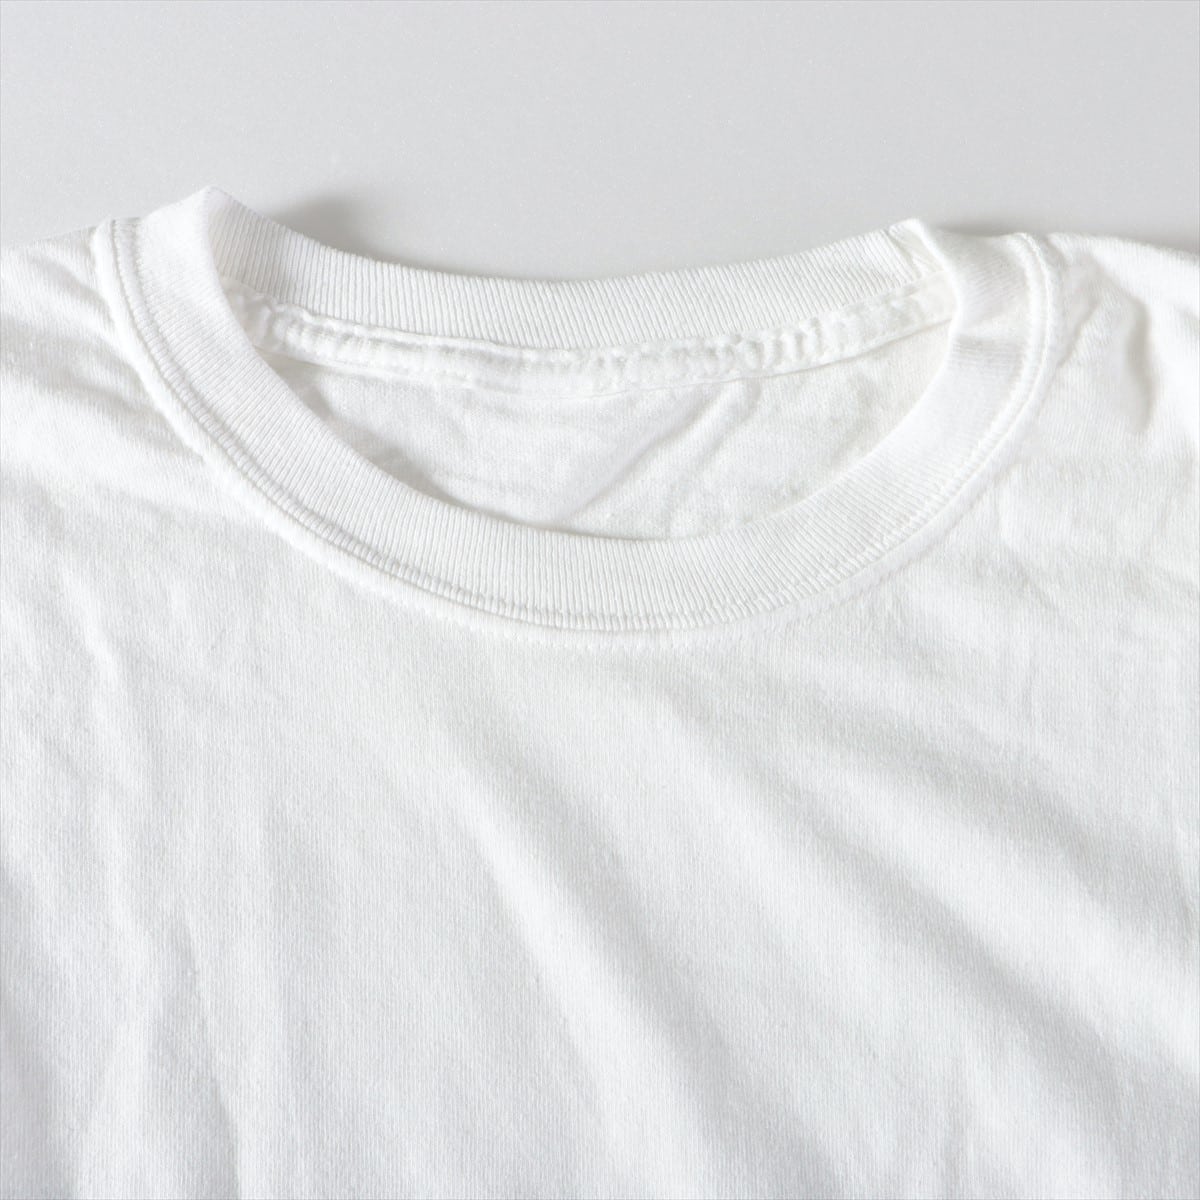 Peace minus one Cotton Long T shirts XL Men's White No brand tag Fragment The Convenience Store